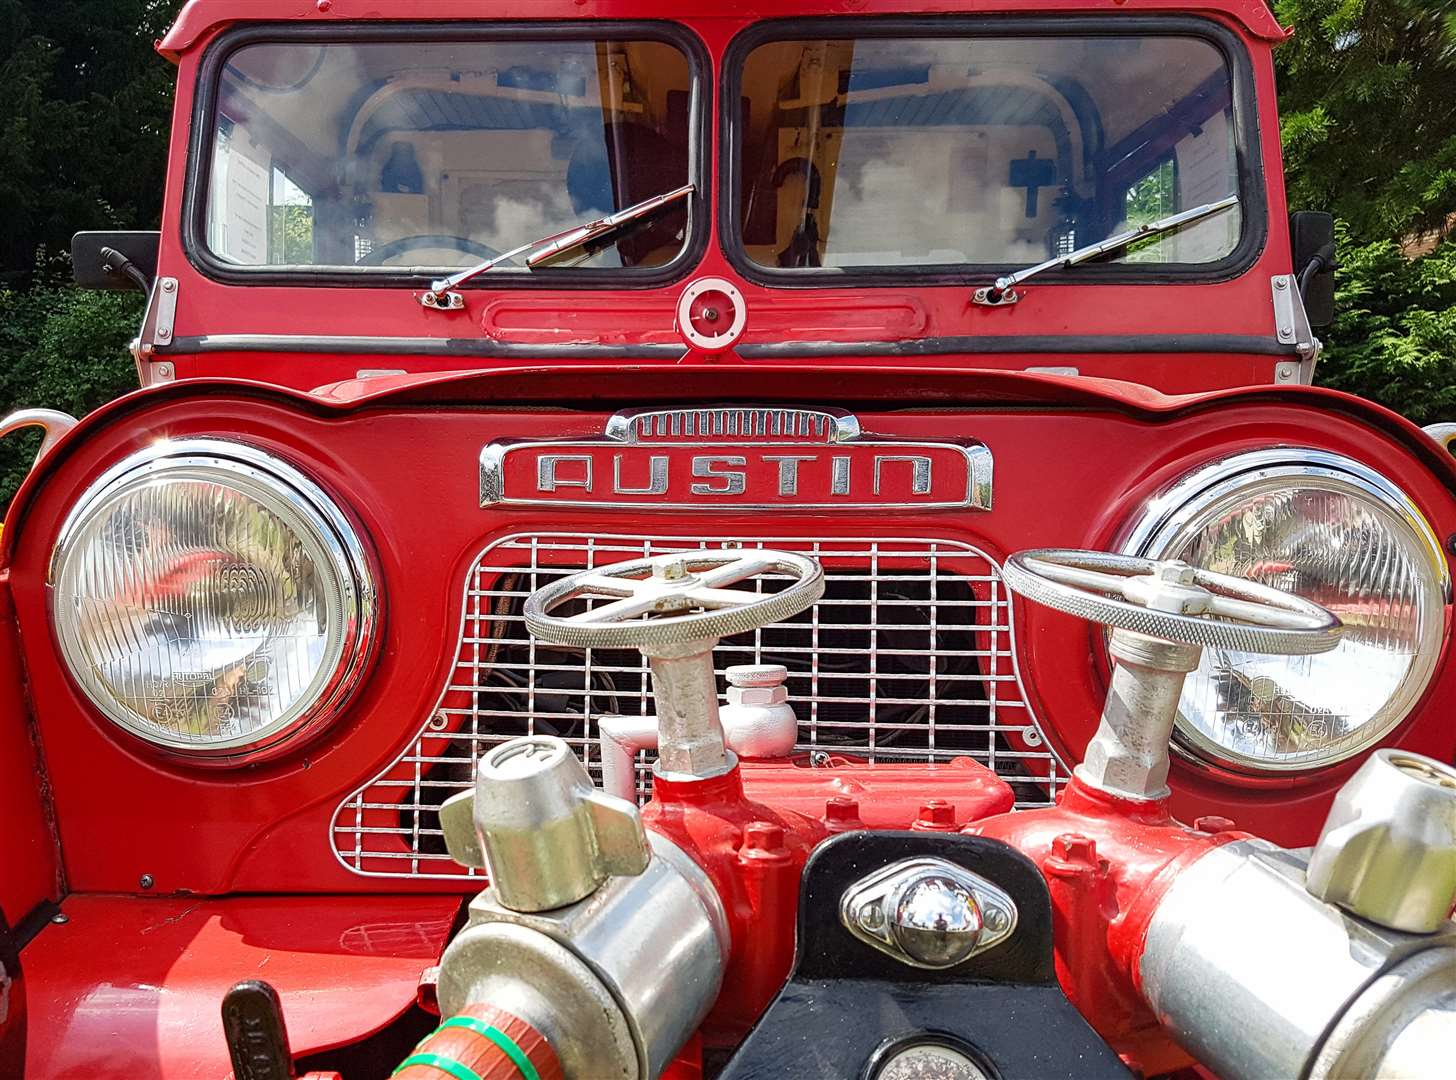 Fire engines, including vintage ones, will be on show at Lullingstone Castle's Fire Engine Rally